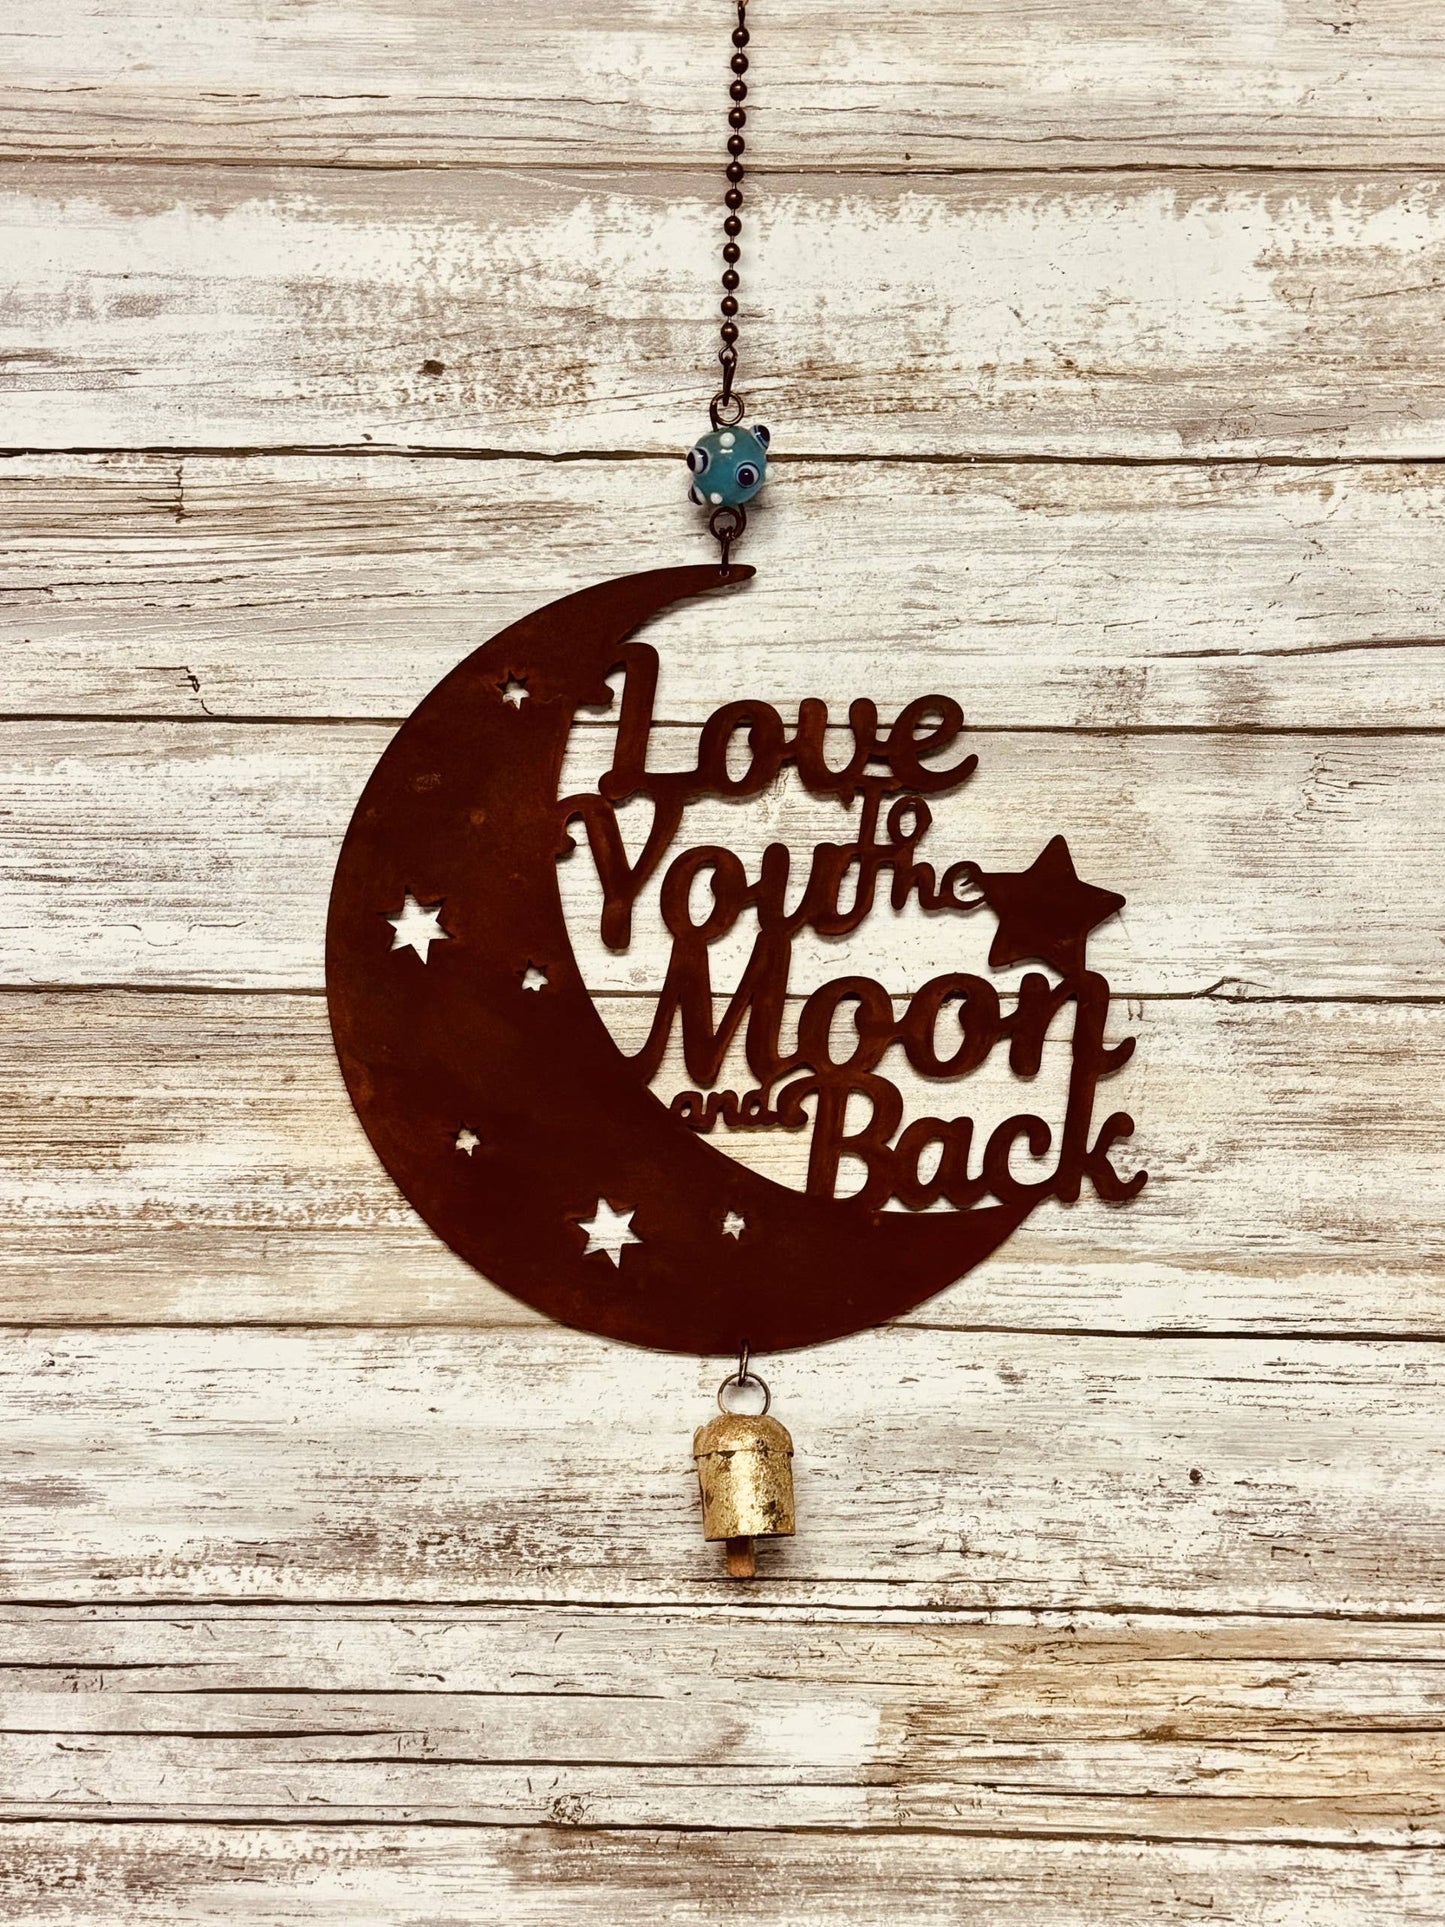 Love you to the Moon and Back Rustic Metal Garden Bell Chime